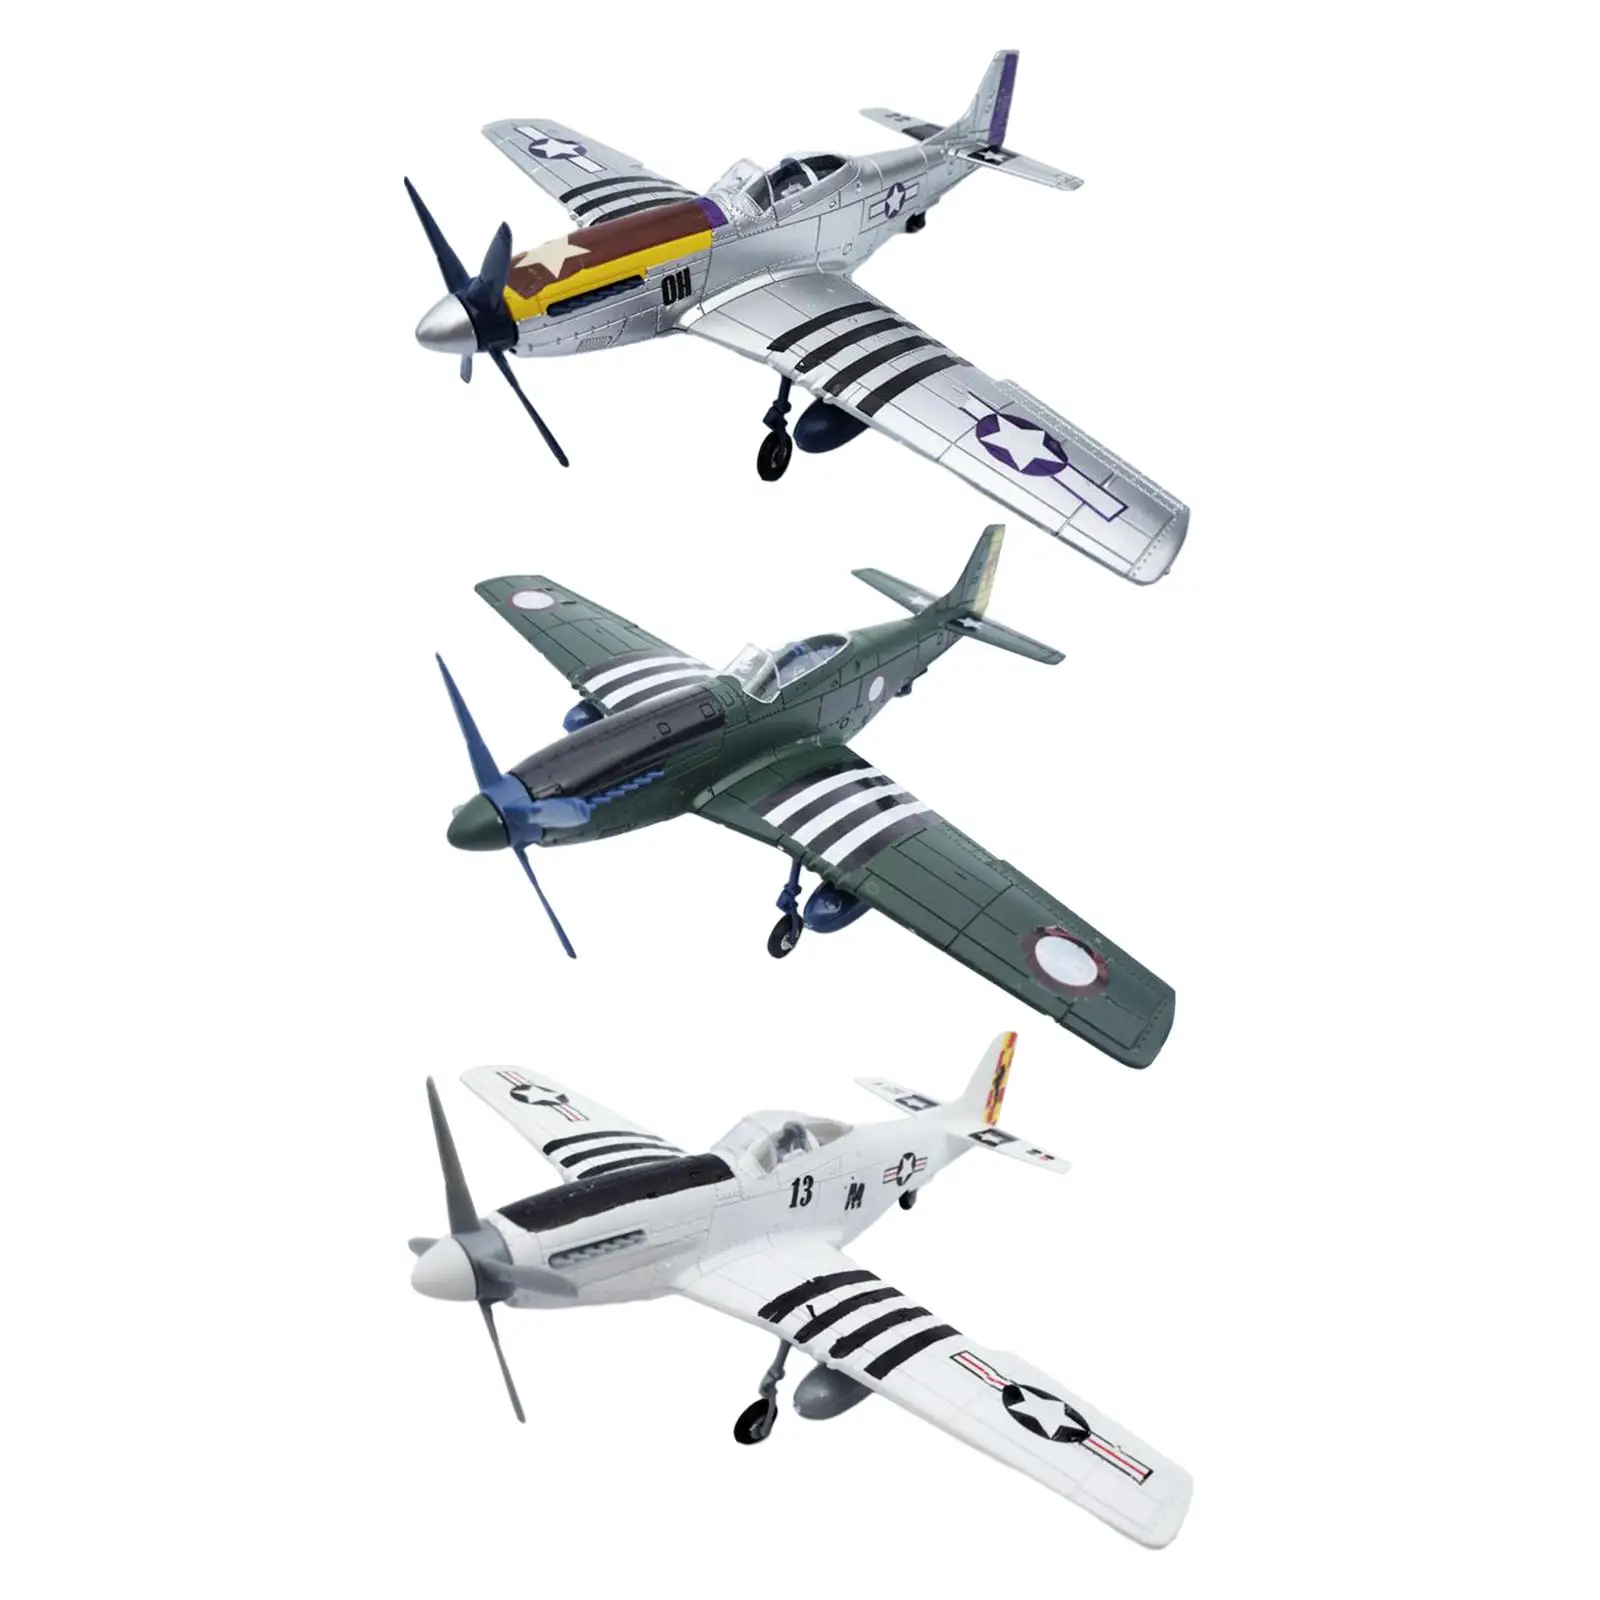 

1:48 Fighter Building Kits Aircraft Model Boy Toys Desk Decor Easy to Assemble Collection Plane DIY Airplane Handcrafts